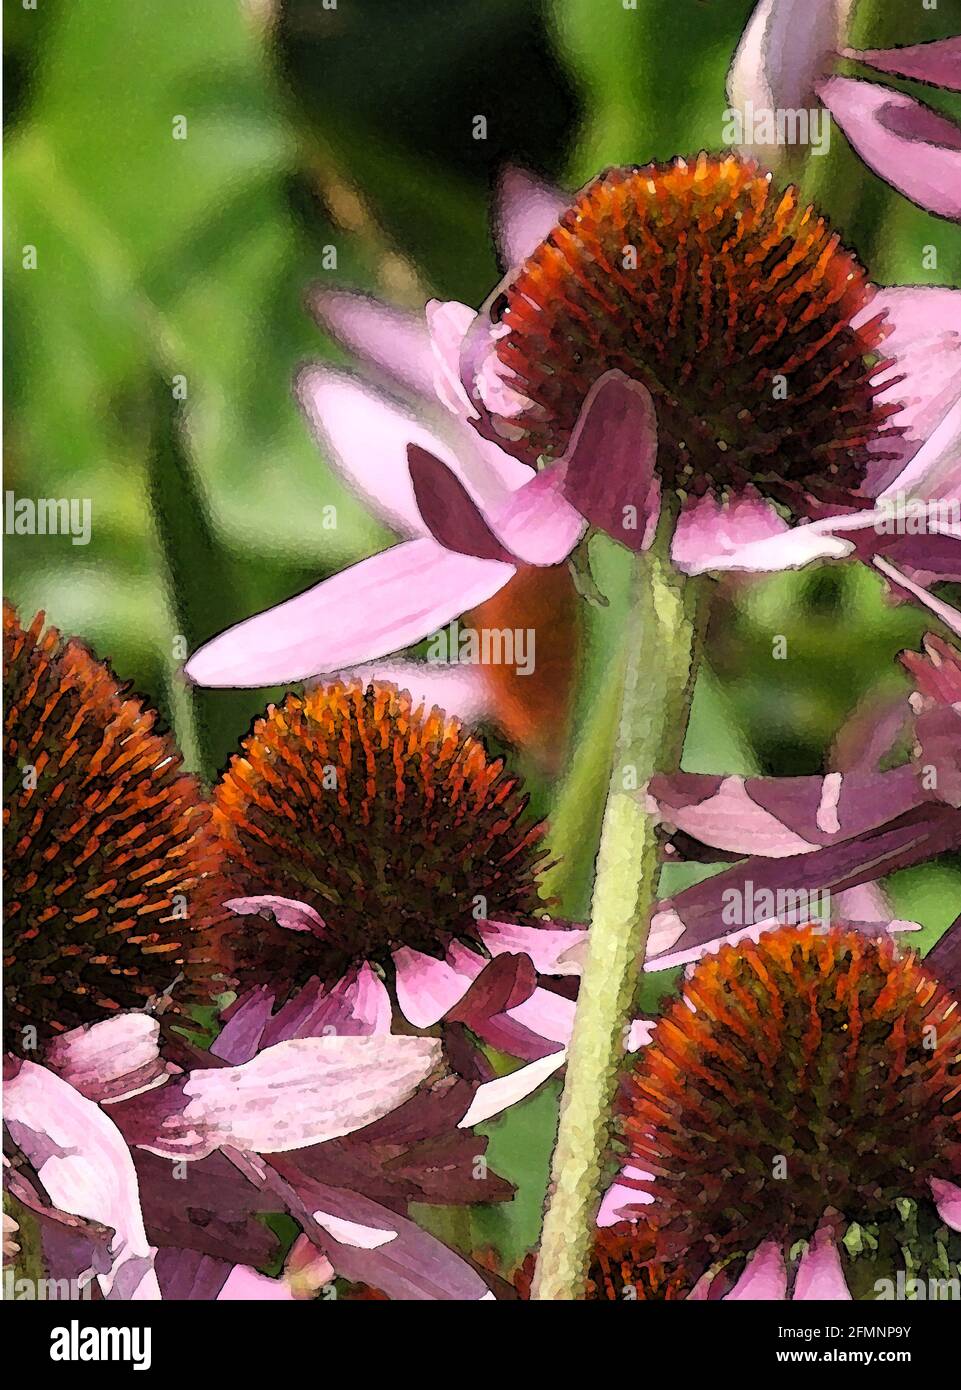 Echinacea  (Echinacea purpurea) 'Abendsonne.' One of Forty-two Iconic Images of English Garden Flowers, Wildflowers and Rural Landscapes. Stock Photo